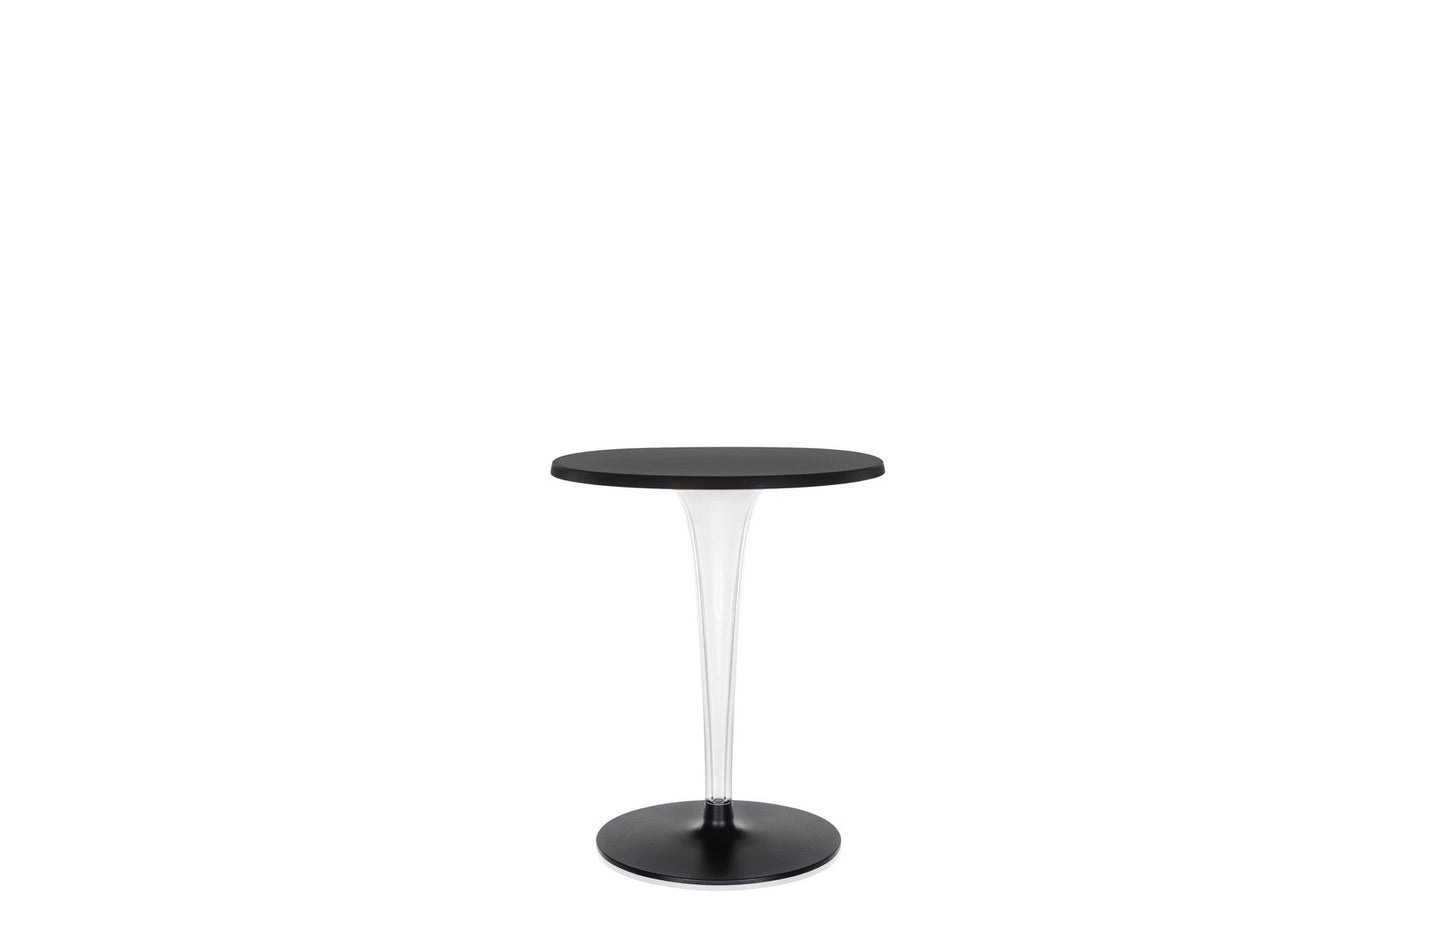 TopTop for Dr. YES Small Round Table - Round Leg
